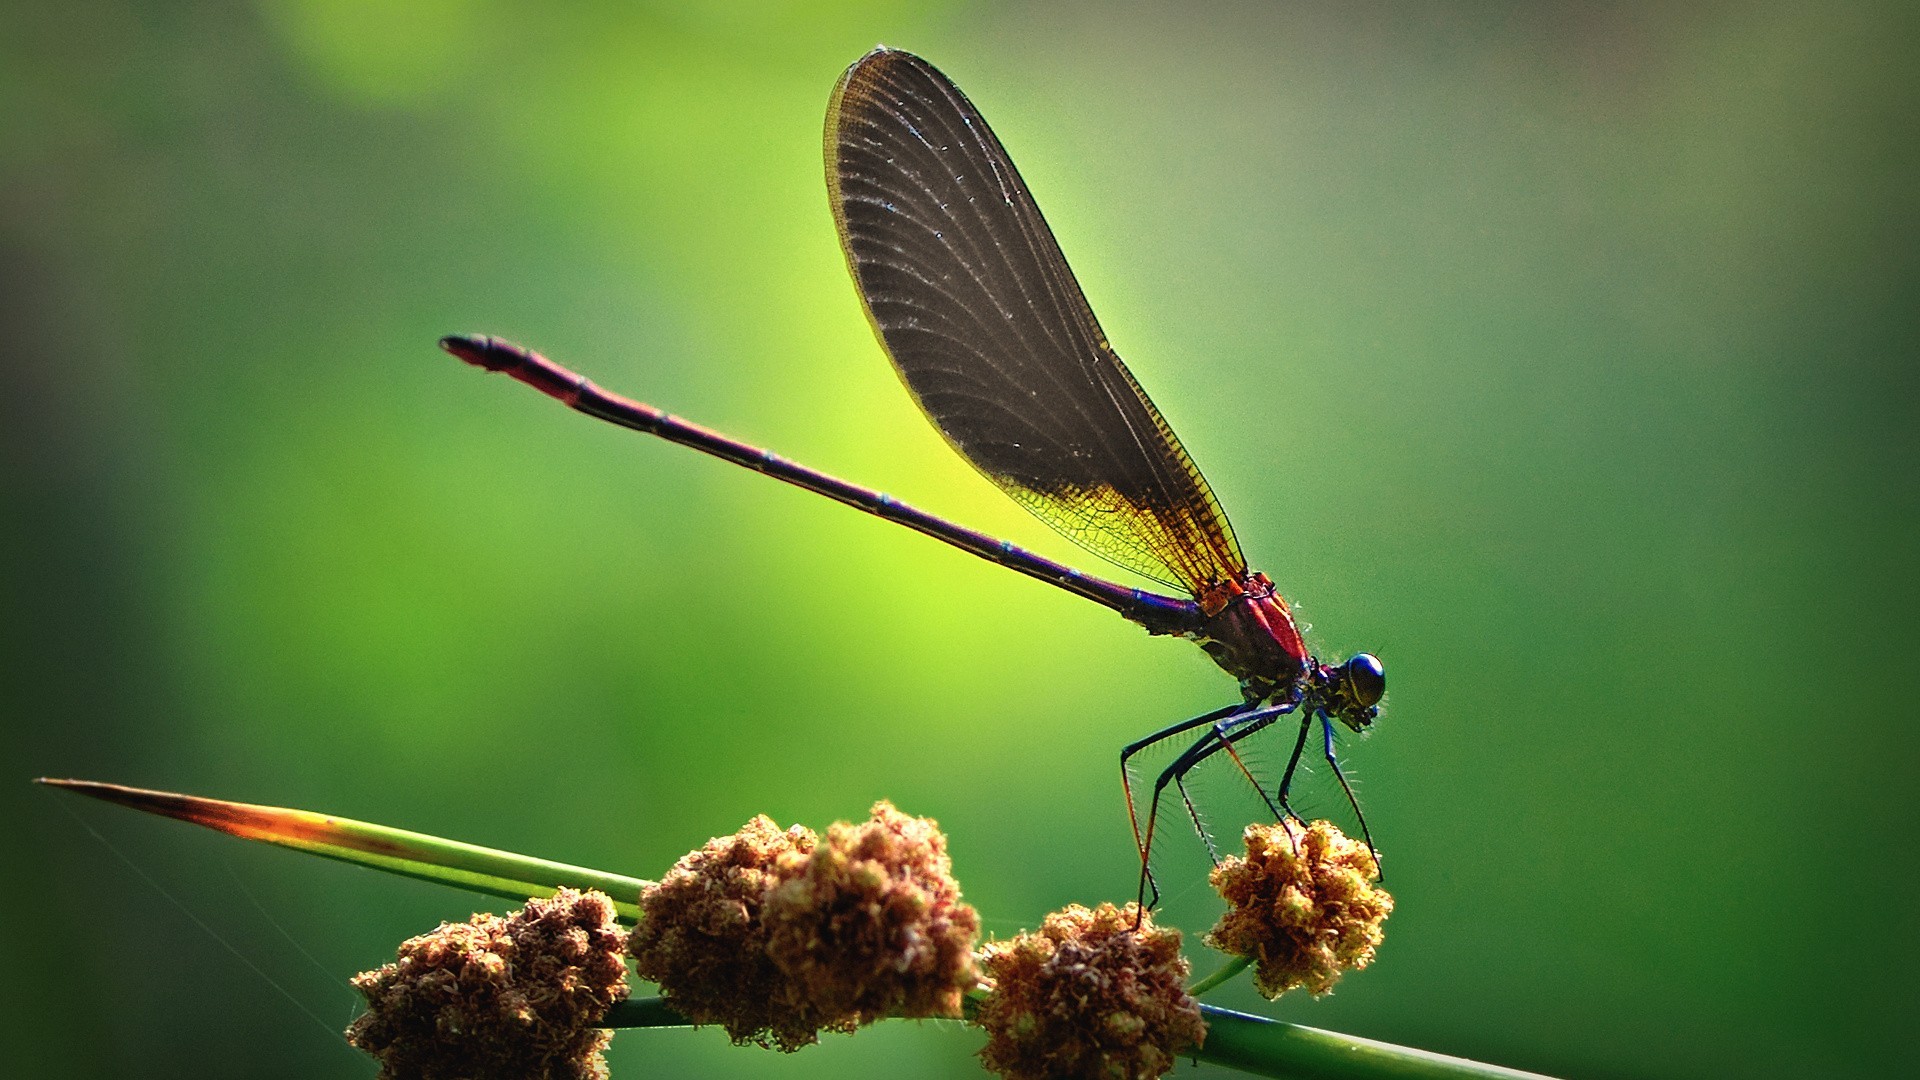 Nature Flying Animals Green Artwork Dragonflies Insect Plants Macro 1920x1080